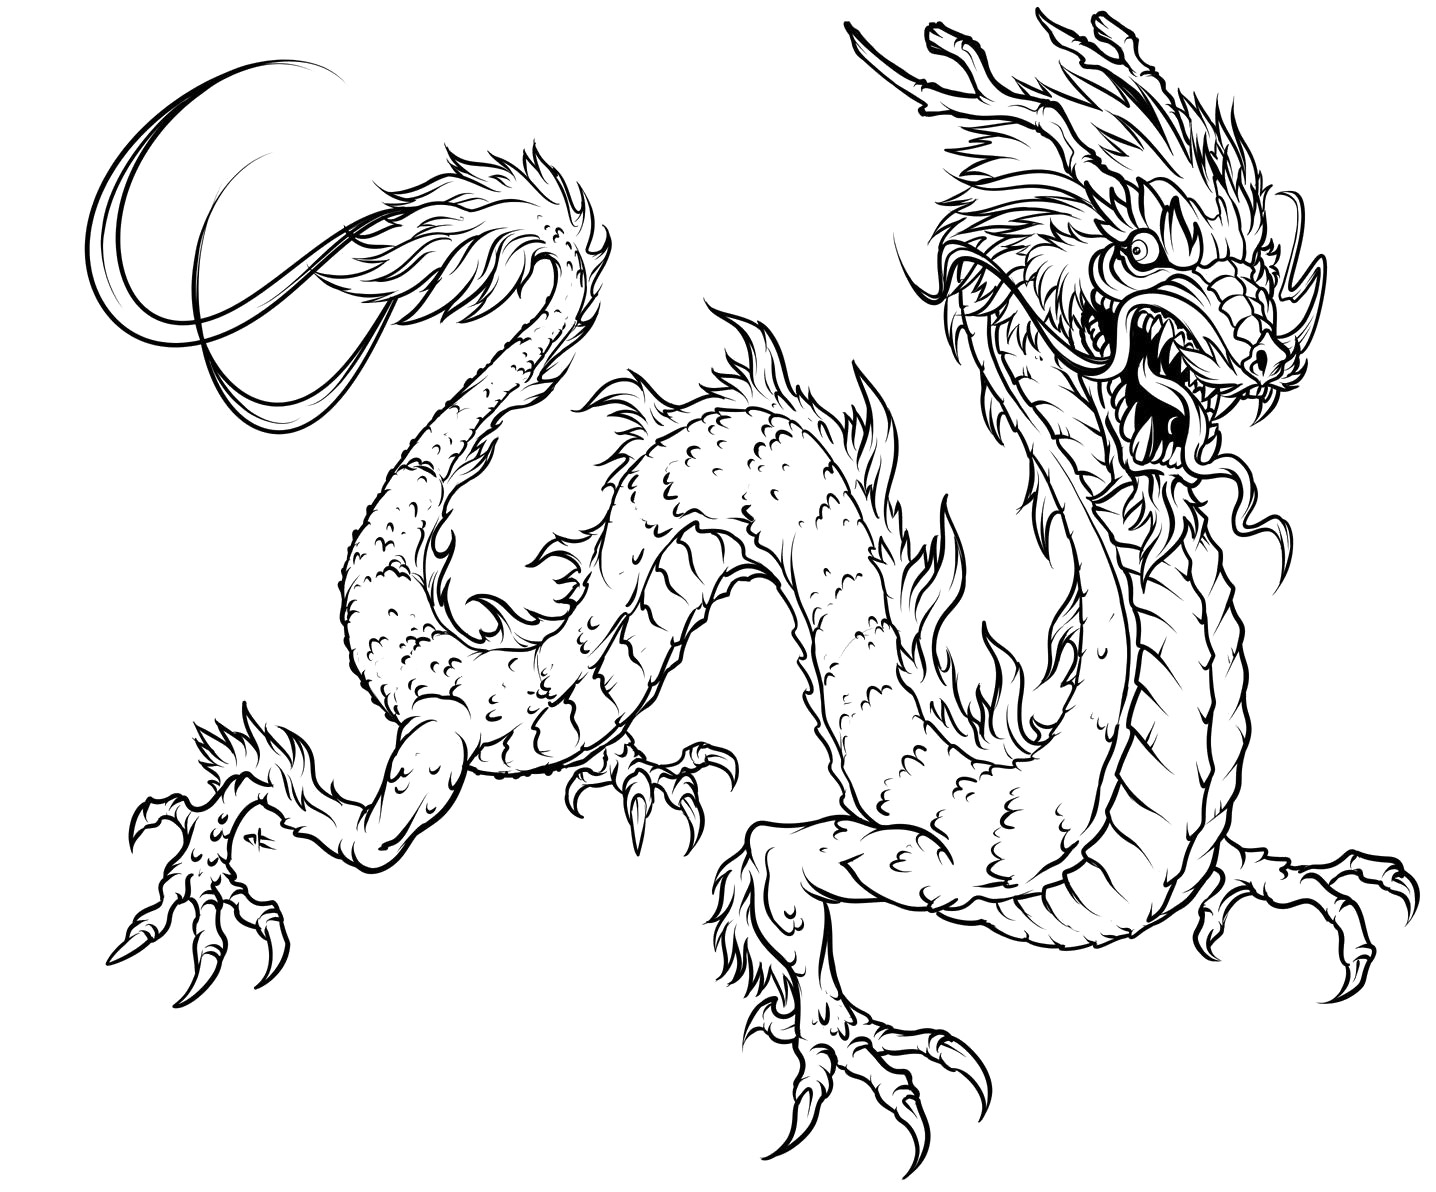 Coloring Pages For Adults Difficult Dragons at GetDrawings | Free download